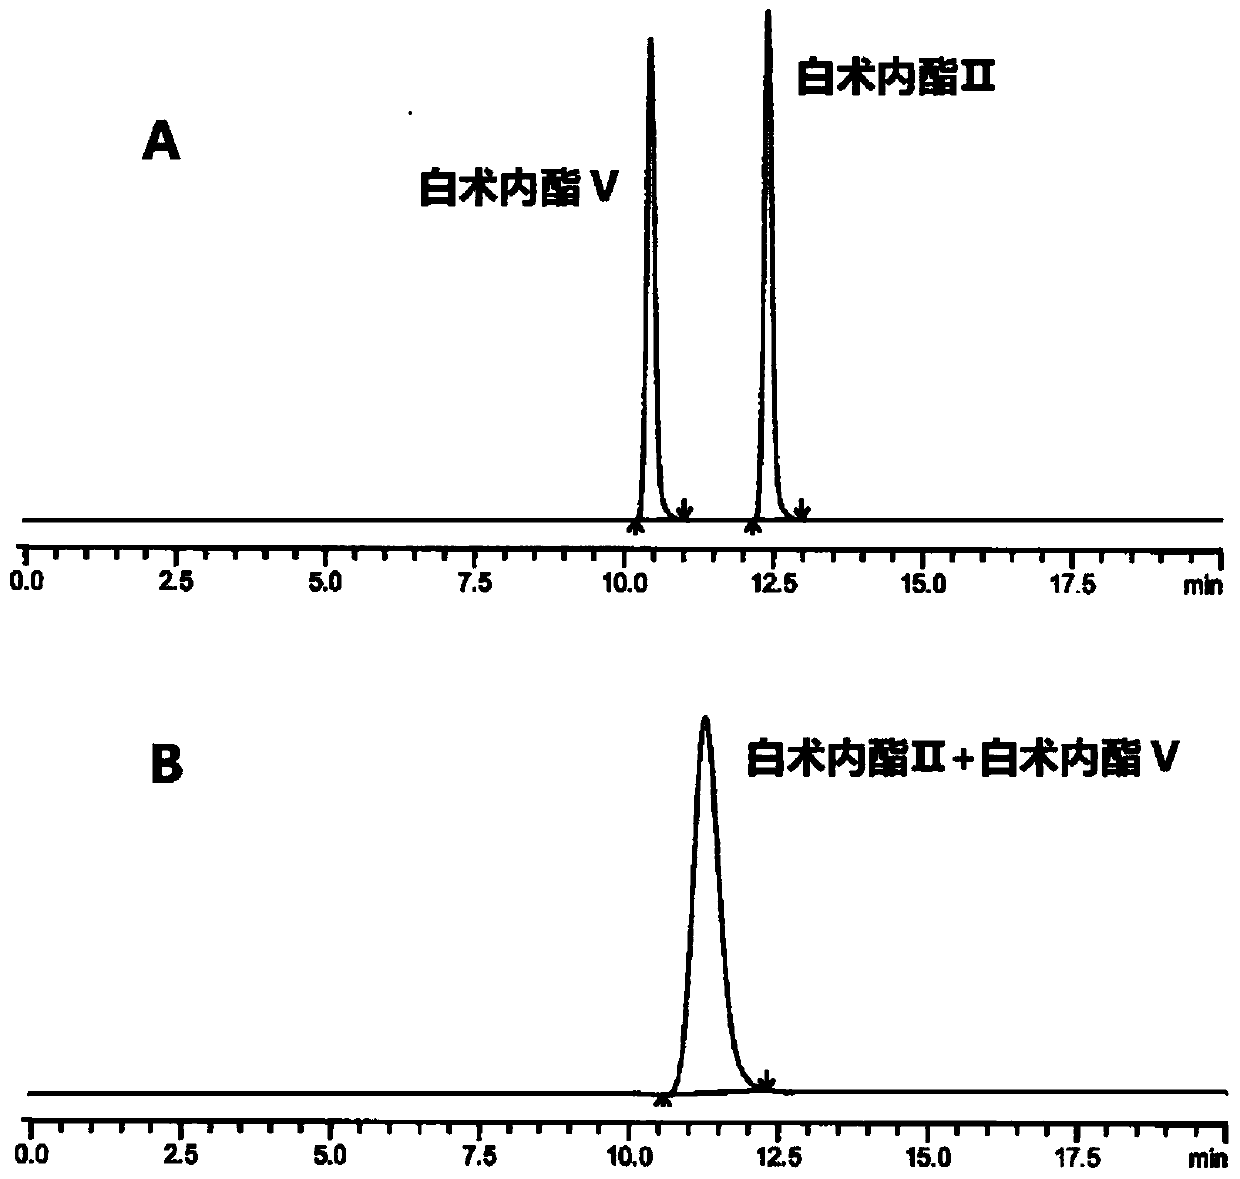 A hplc method for separating and detecting atractyloid ii and atractyloid v